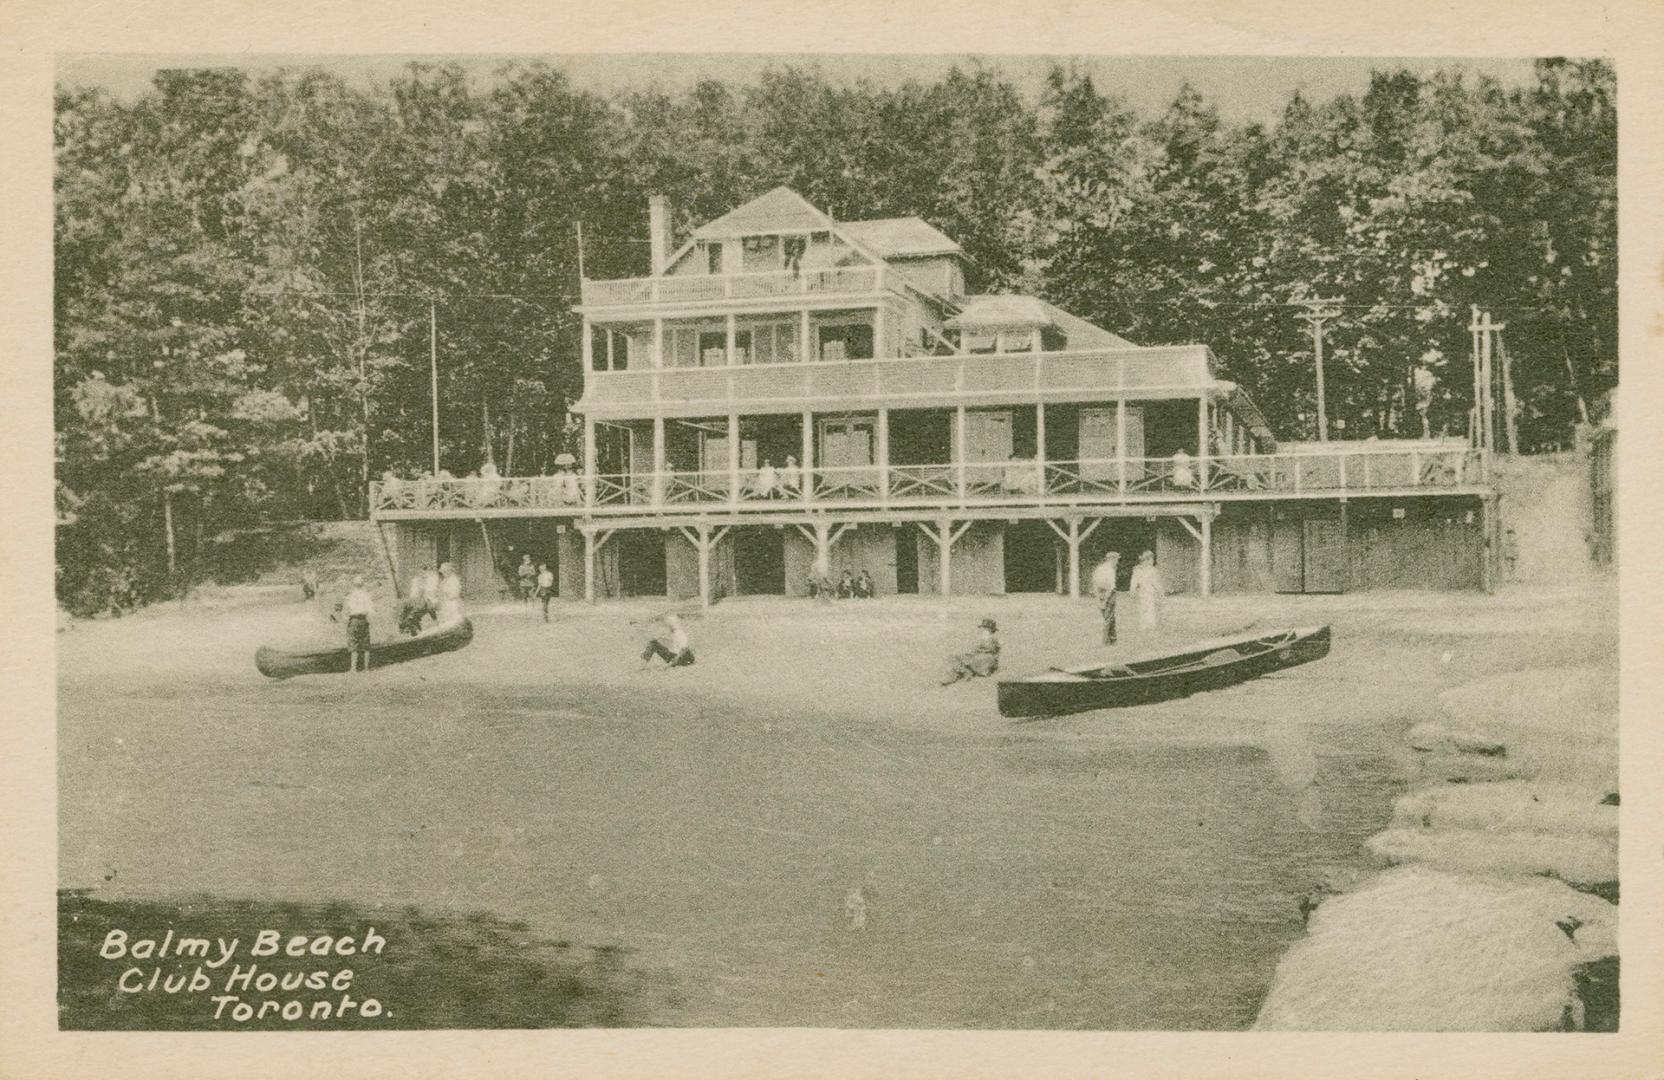 Black and white picture of a four story wooden building on the edge of a beach.